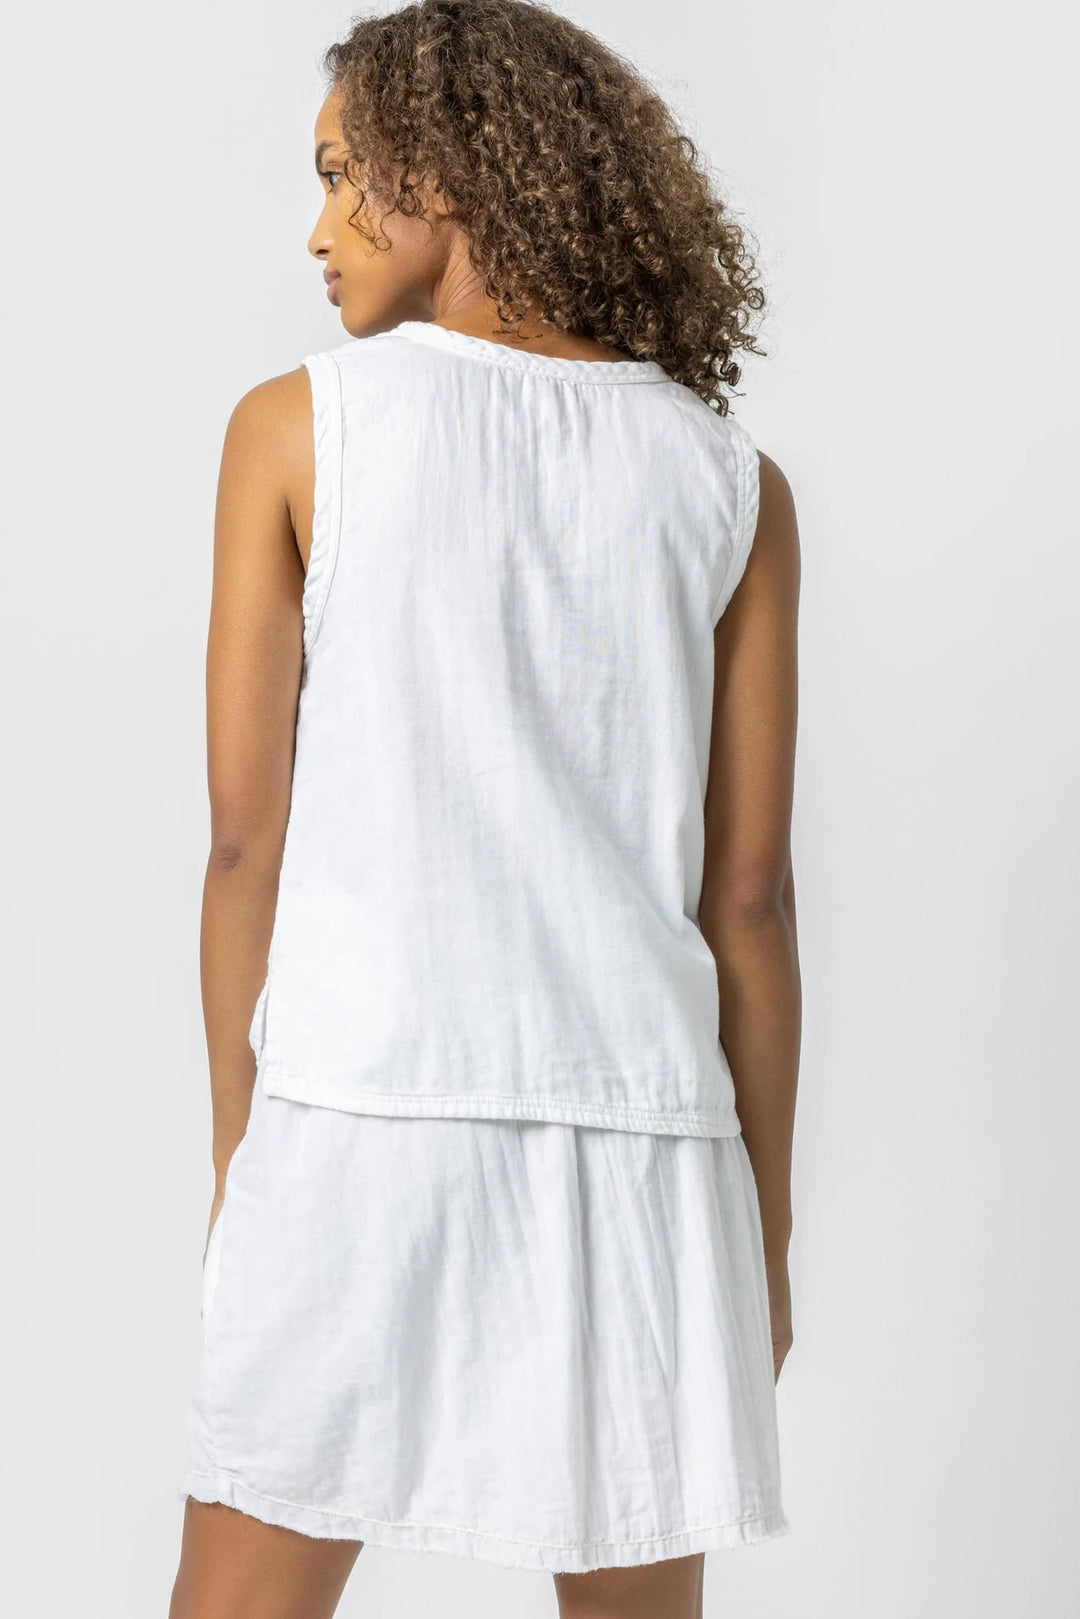 TANK WITH SIDE SLITS - LILLA P